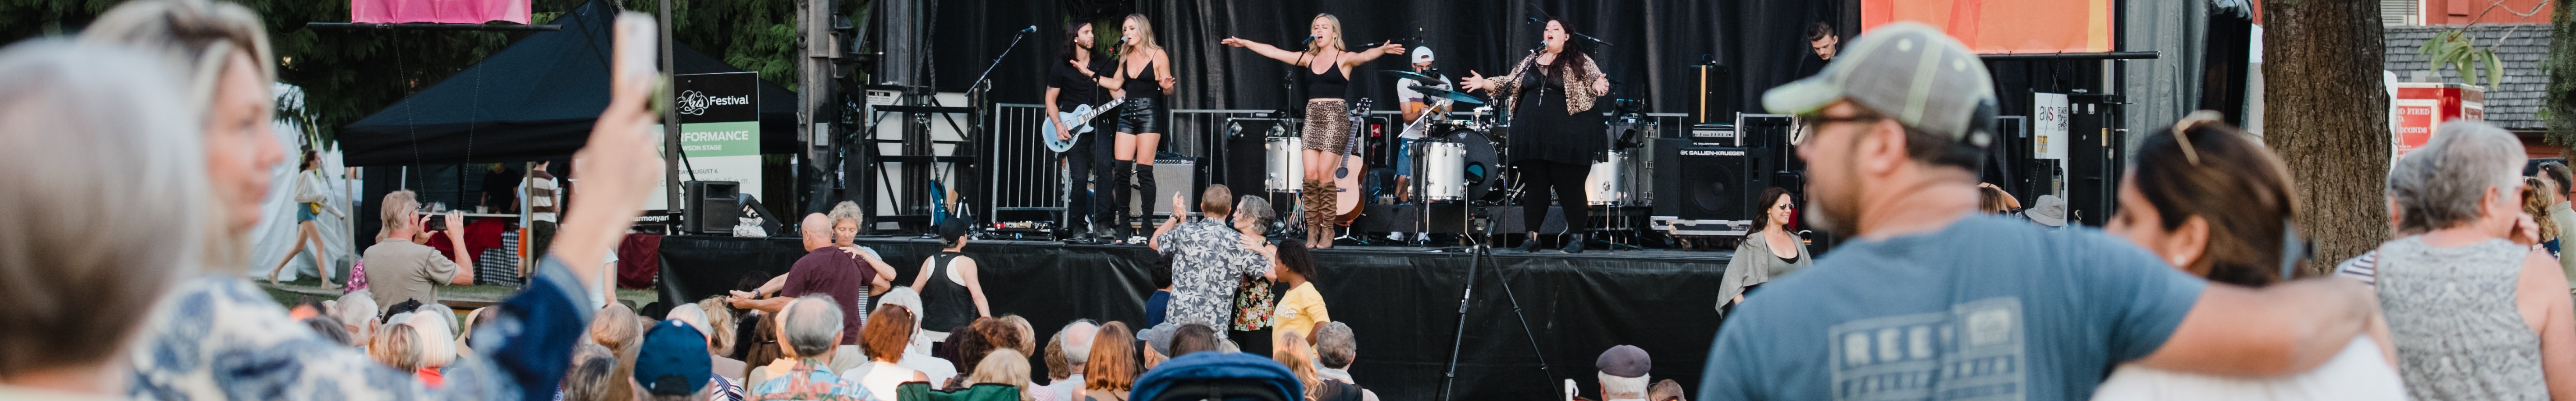 The image is a photo from the Harmony Arts Festival performance featuring a blond woman with a microphone on stage and a crowd of people. The scene captures a live music event with a mix of men and women standing outdoors enjoying the performance